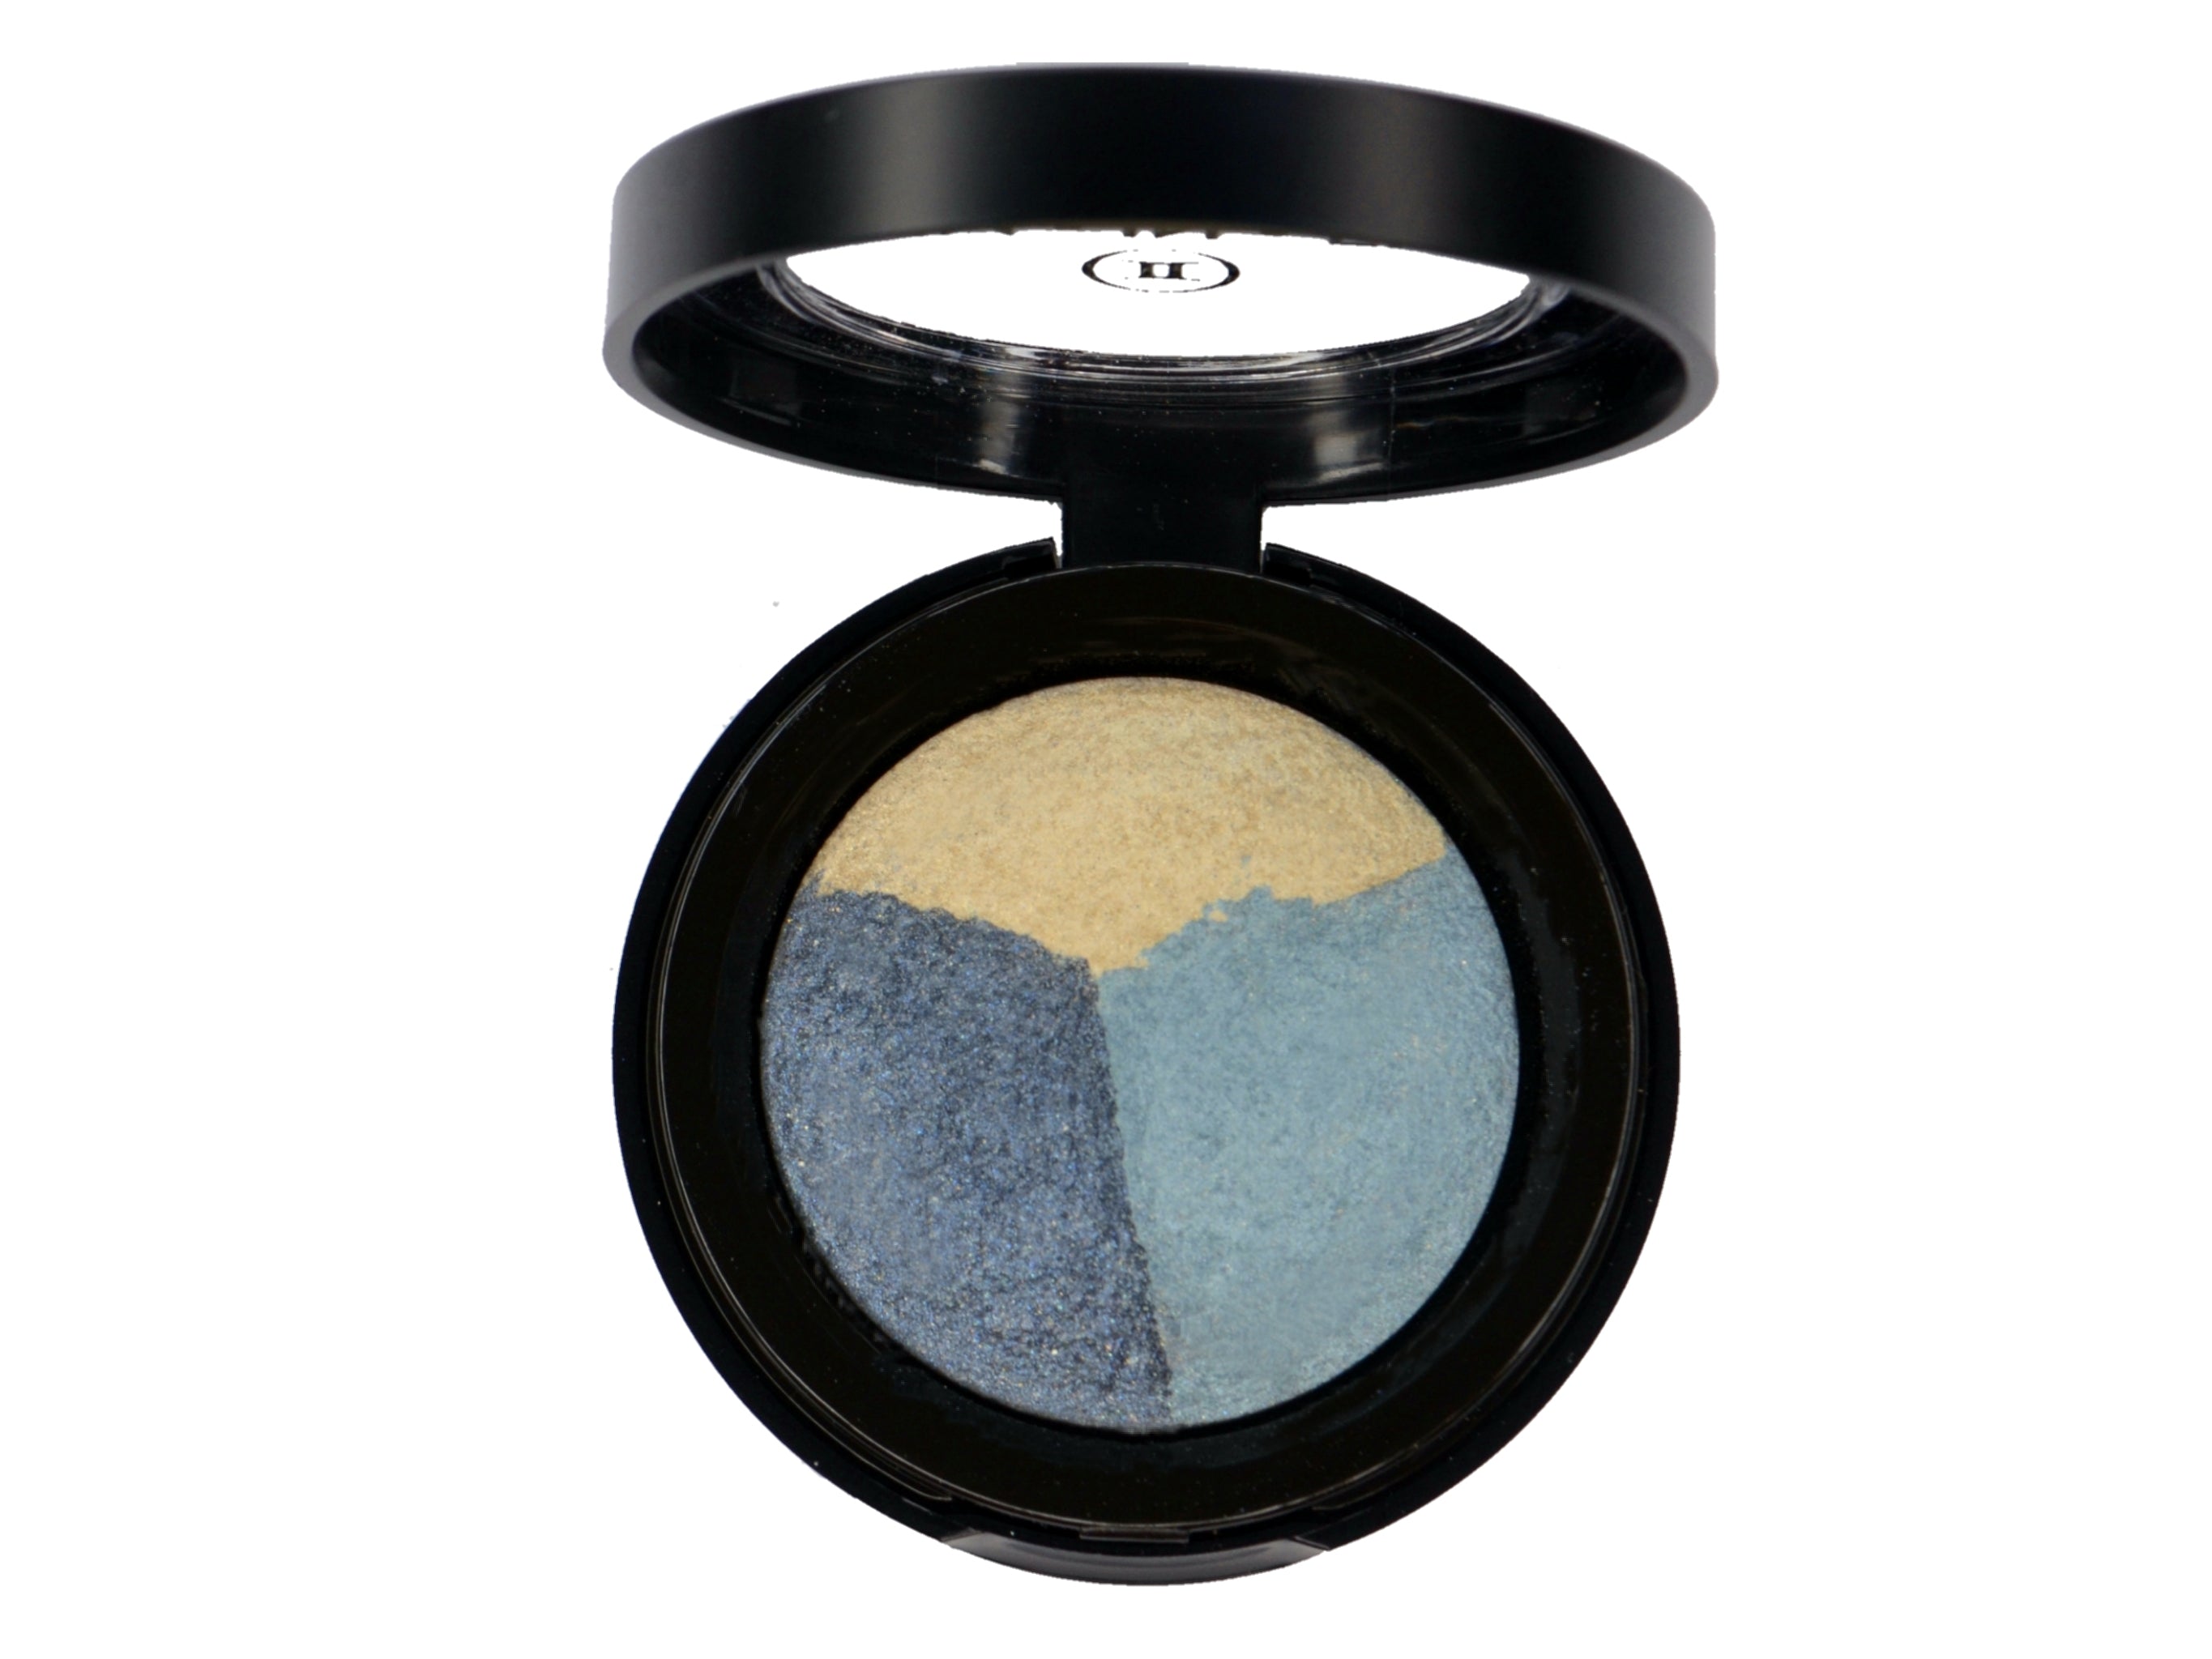 all-in-one eyeshadow